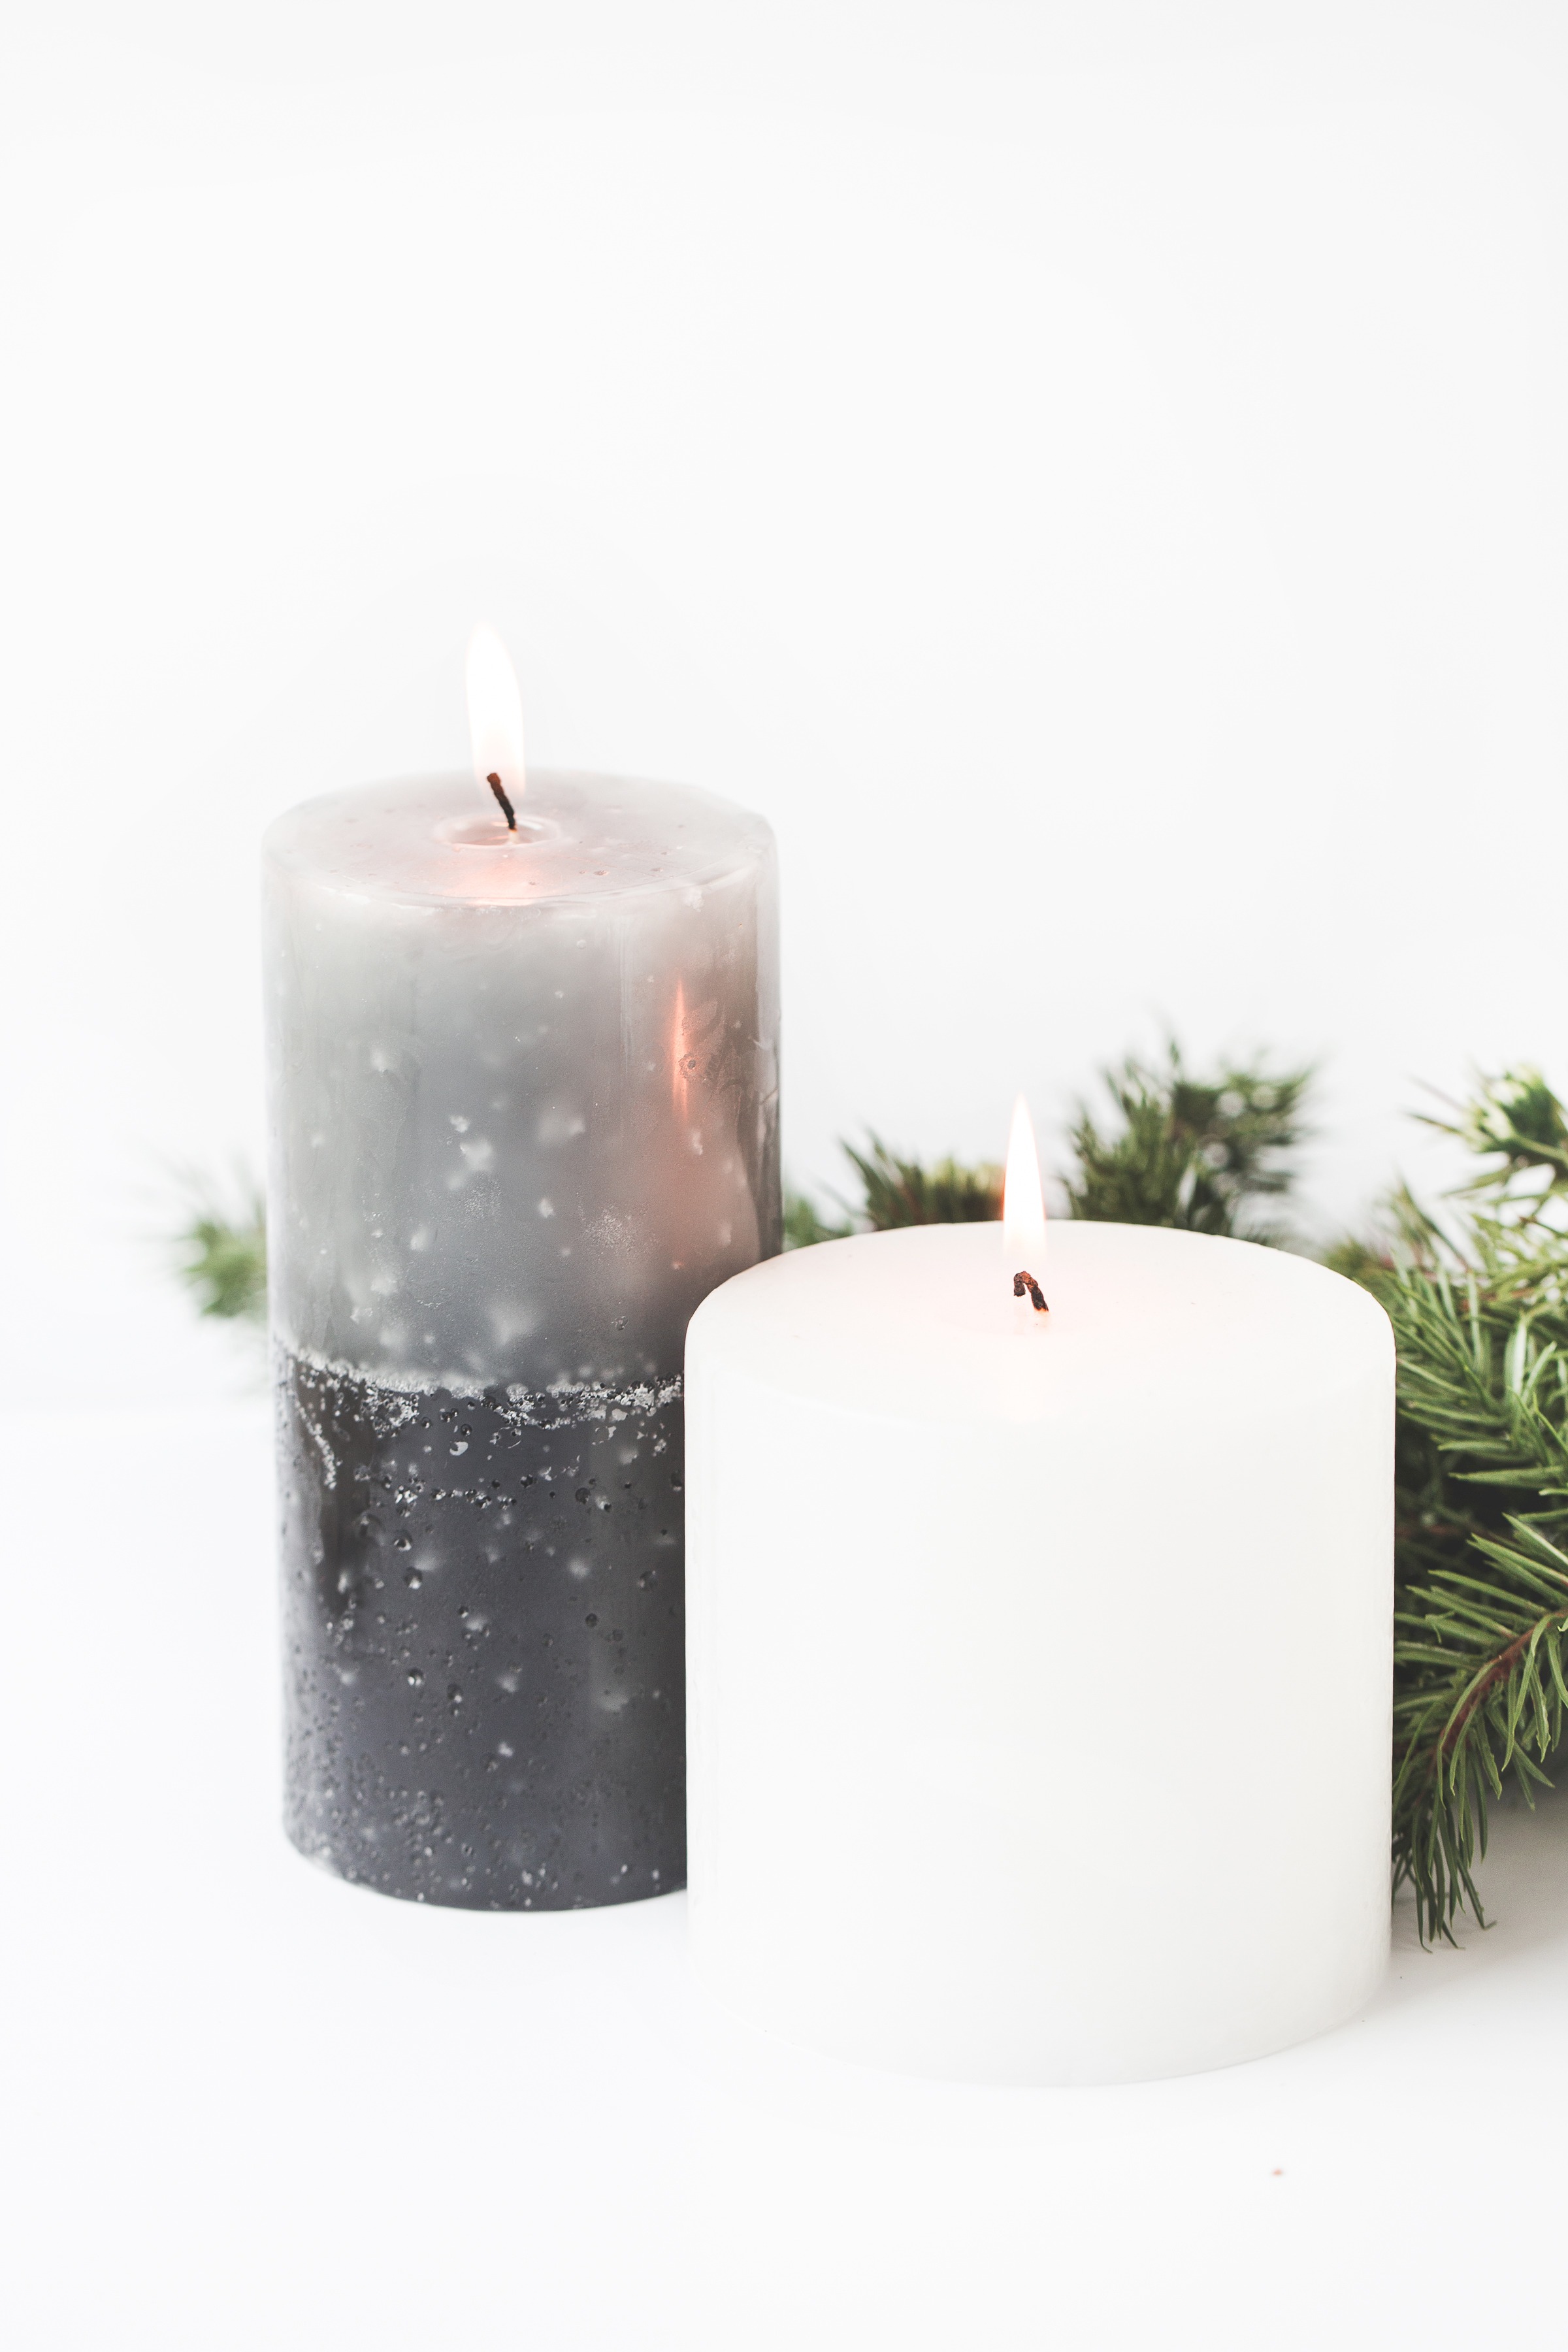 The Best Candles to Make Your House More Festive 49